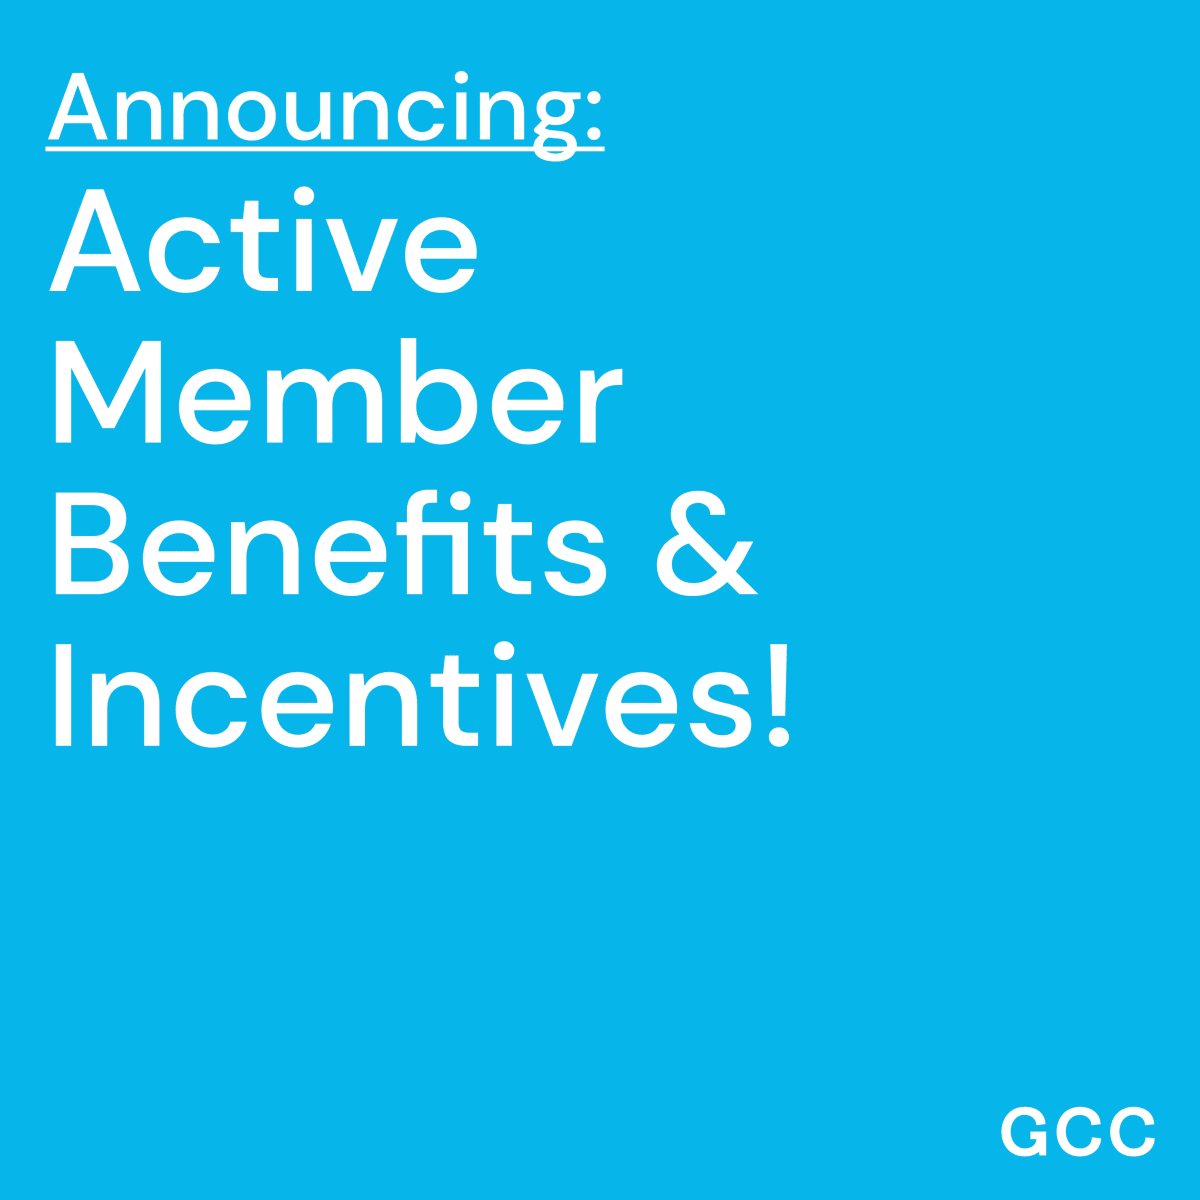 Announcing Active Member Benefits & Incentives